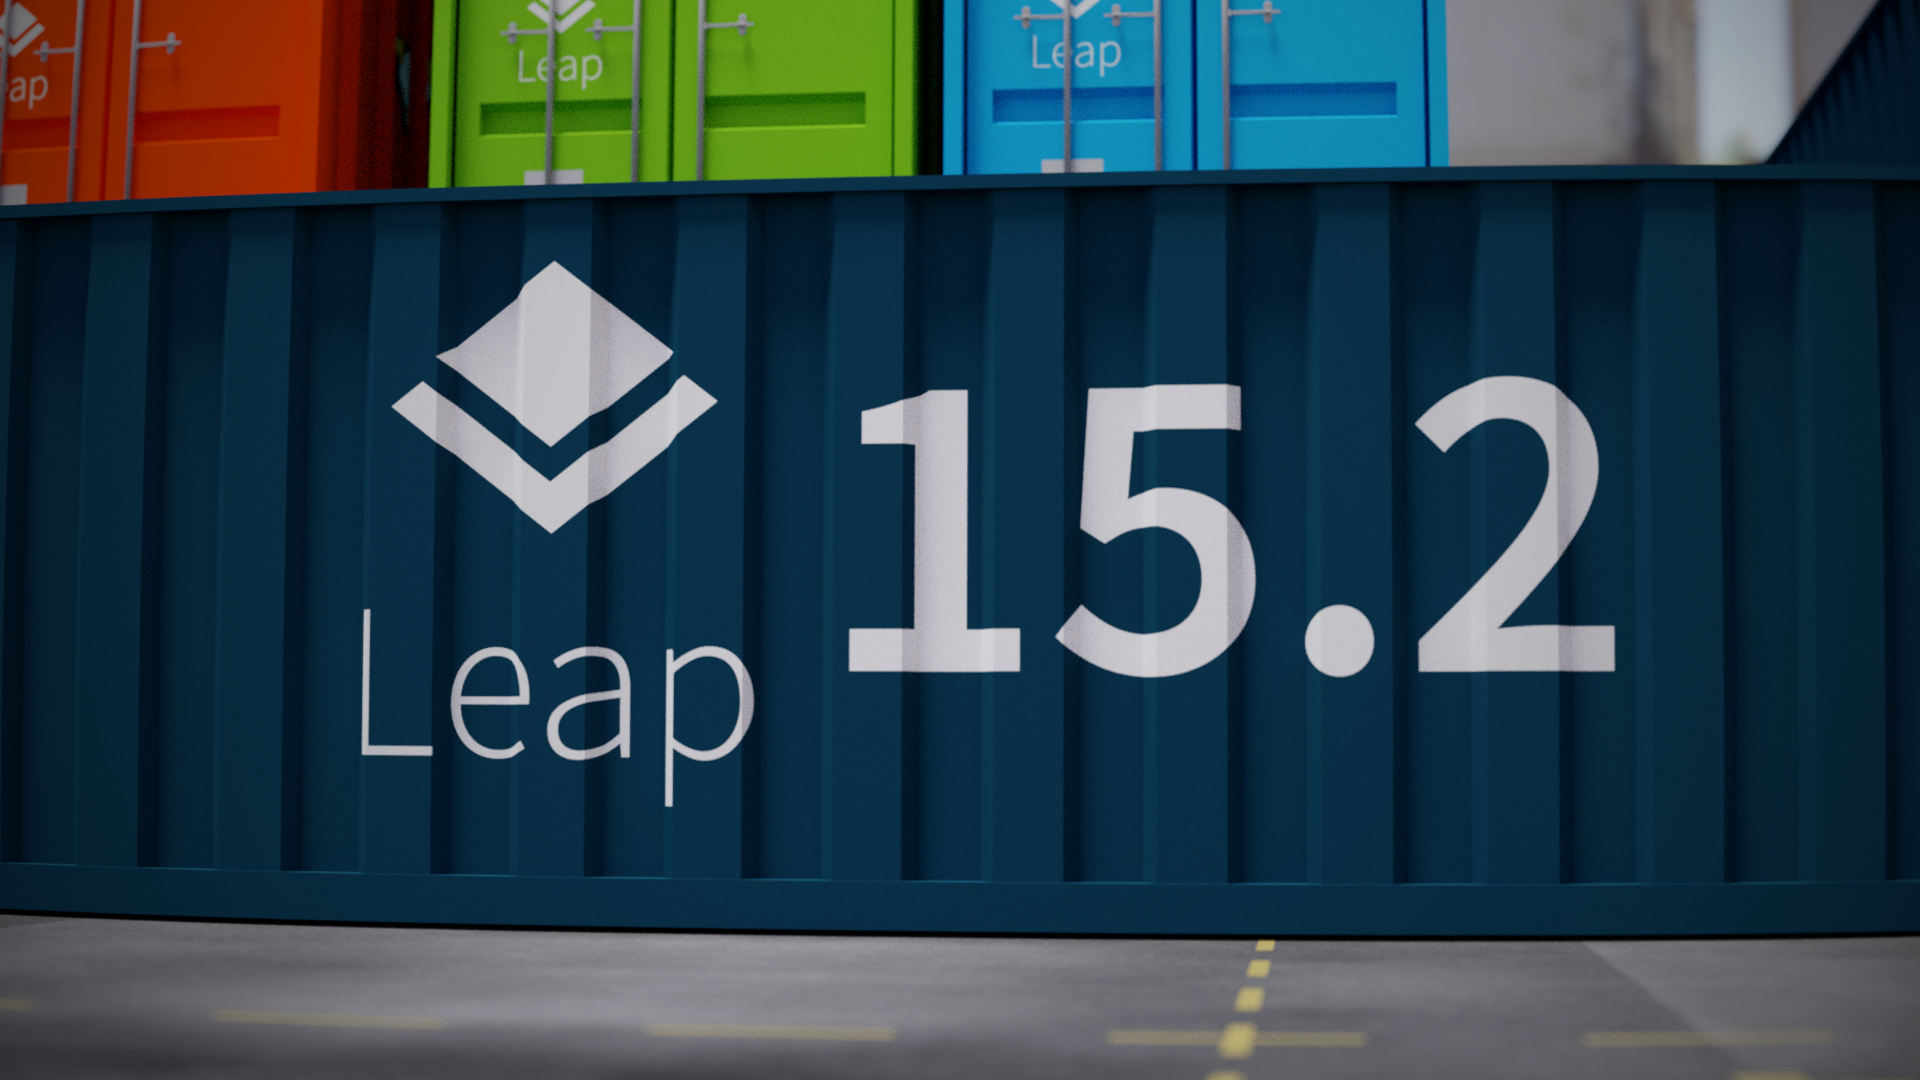 openSUSE Leap 15.2 Release Brings Exciting New Artificial Intelligence (AI), Machine Learning, and Container Packages